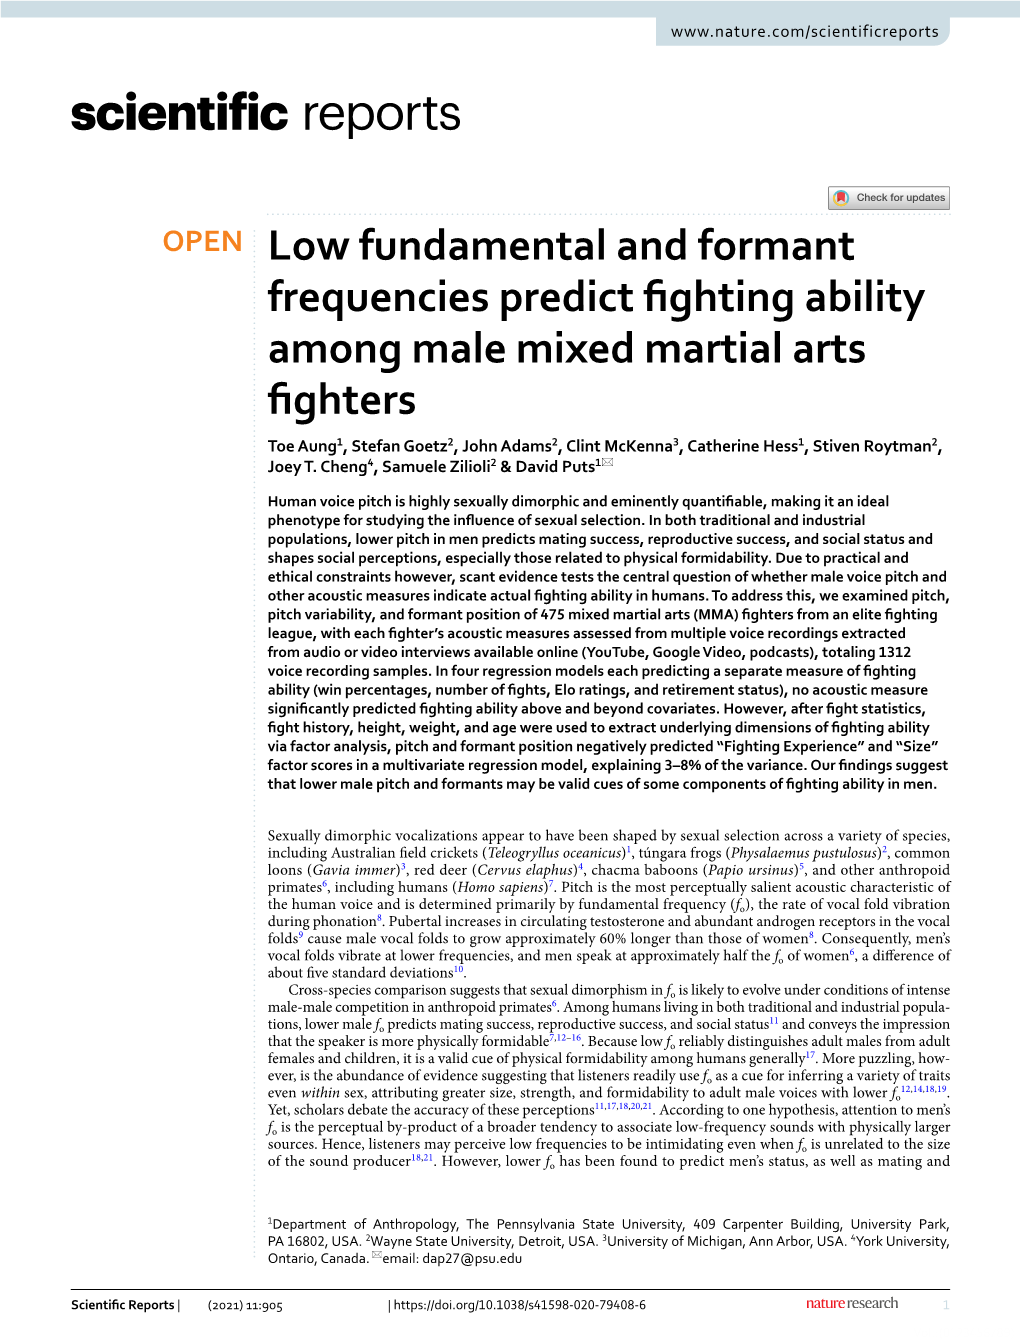 Low Fundamental and Formant Frequencies Predict Fighting Ability